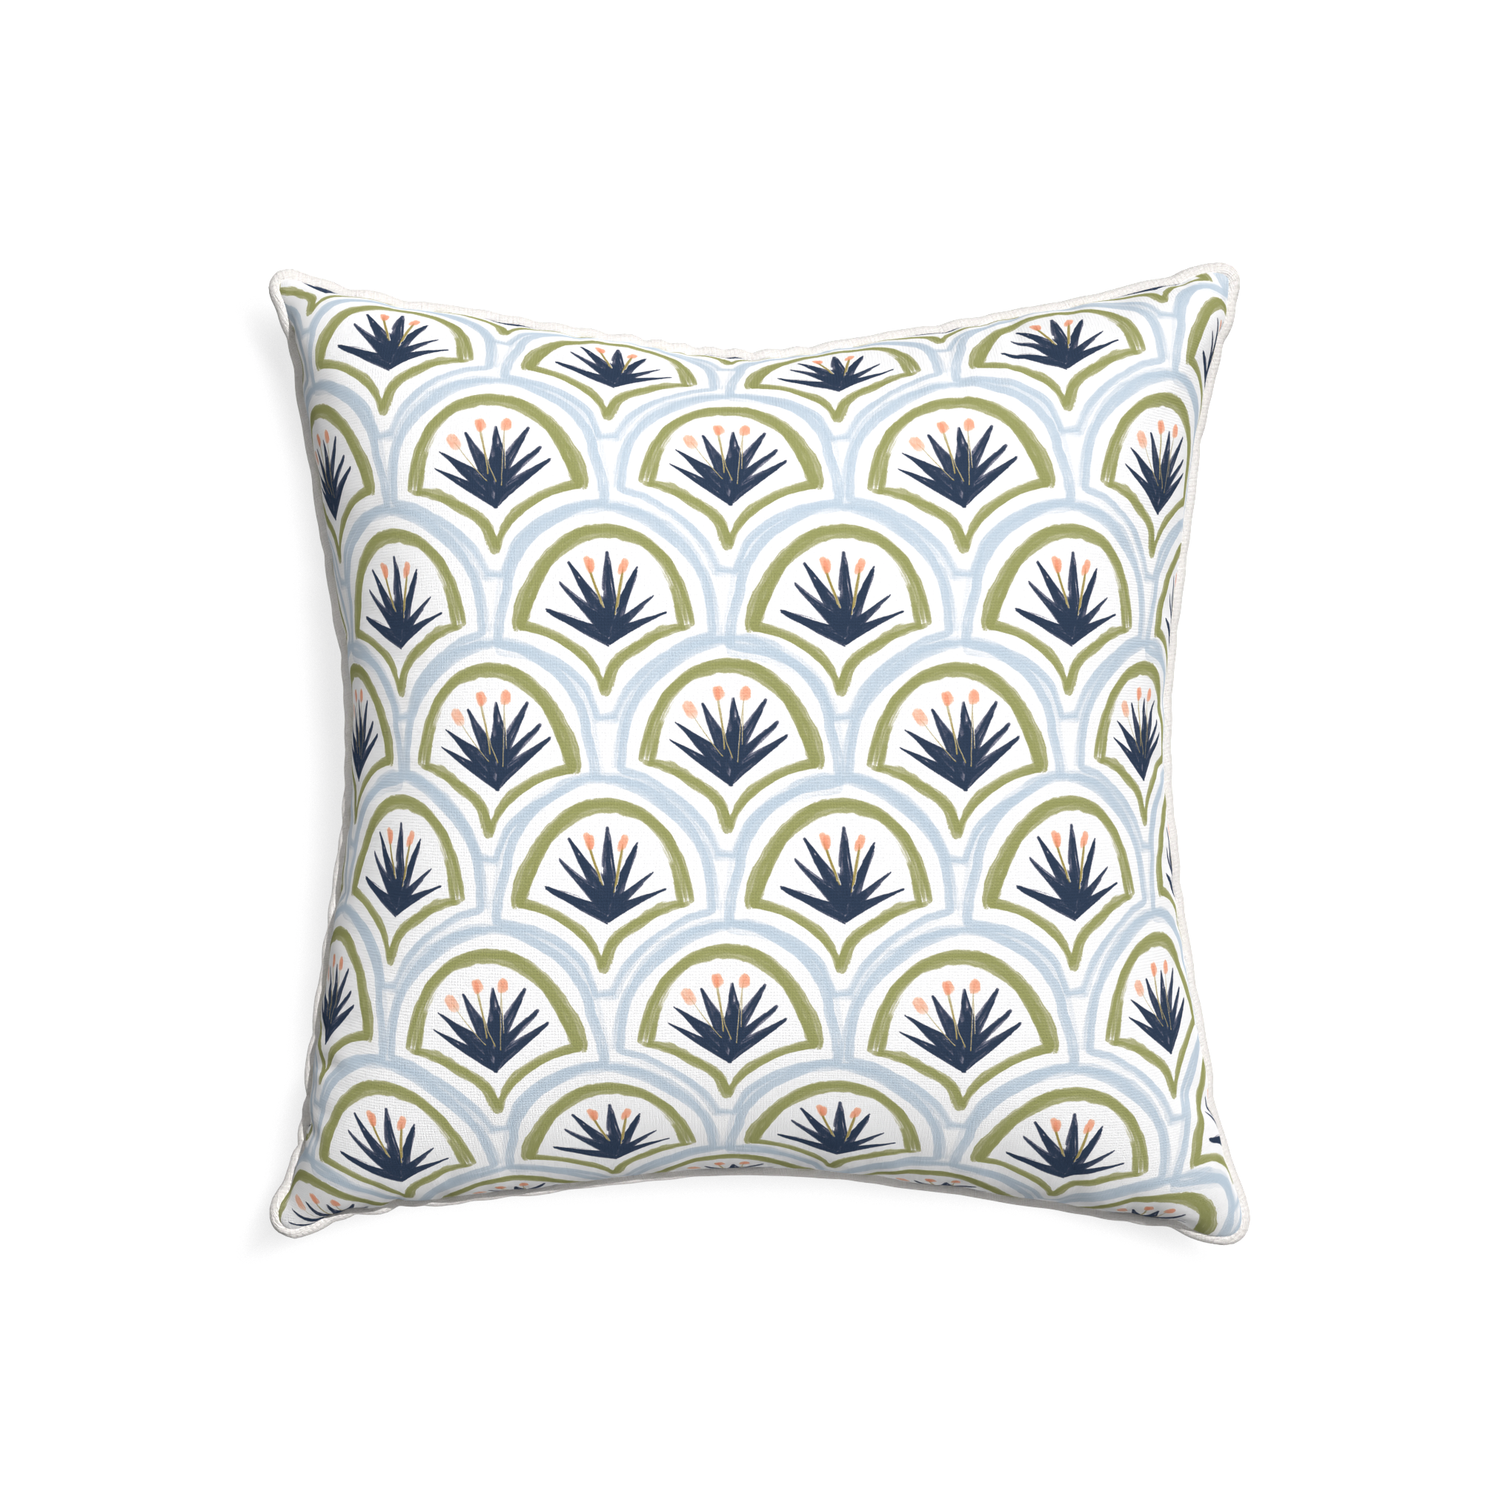 22-square thatcher midnight custom art deco palm patternpillow with snow piping on white background